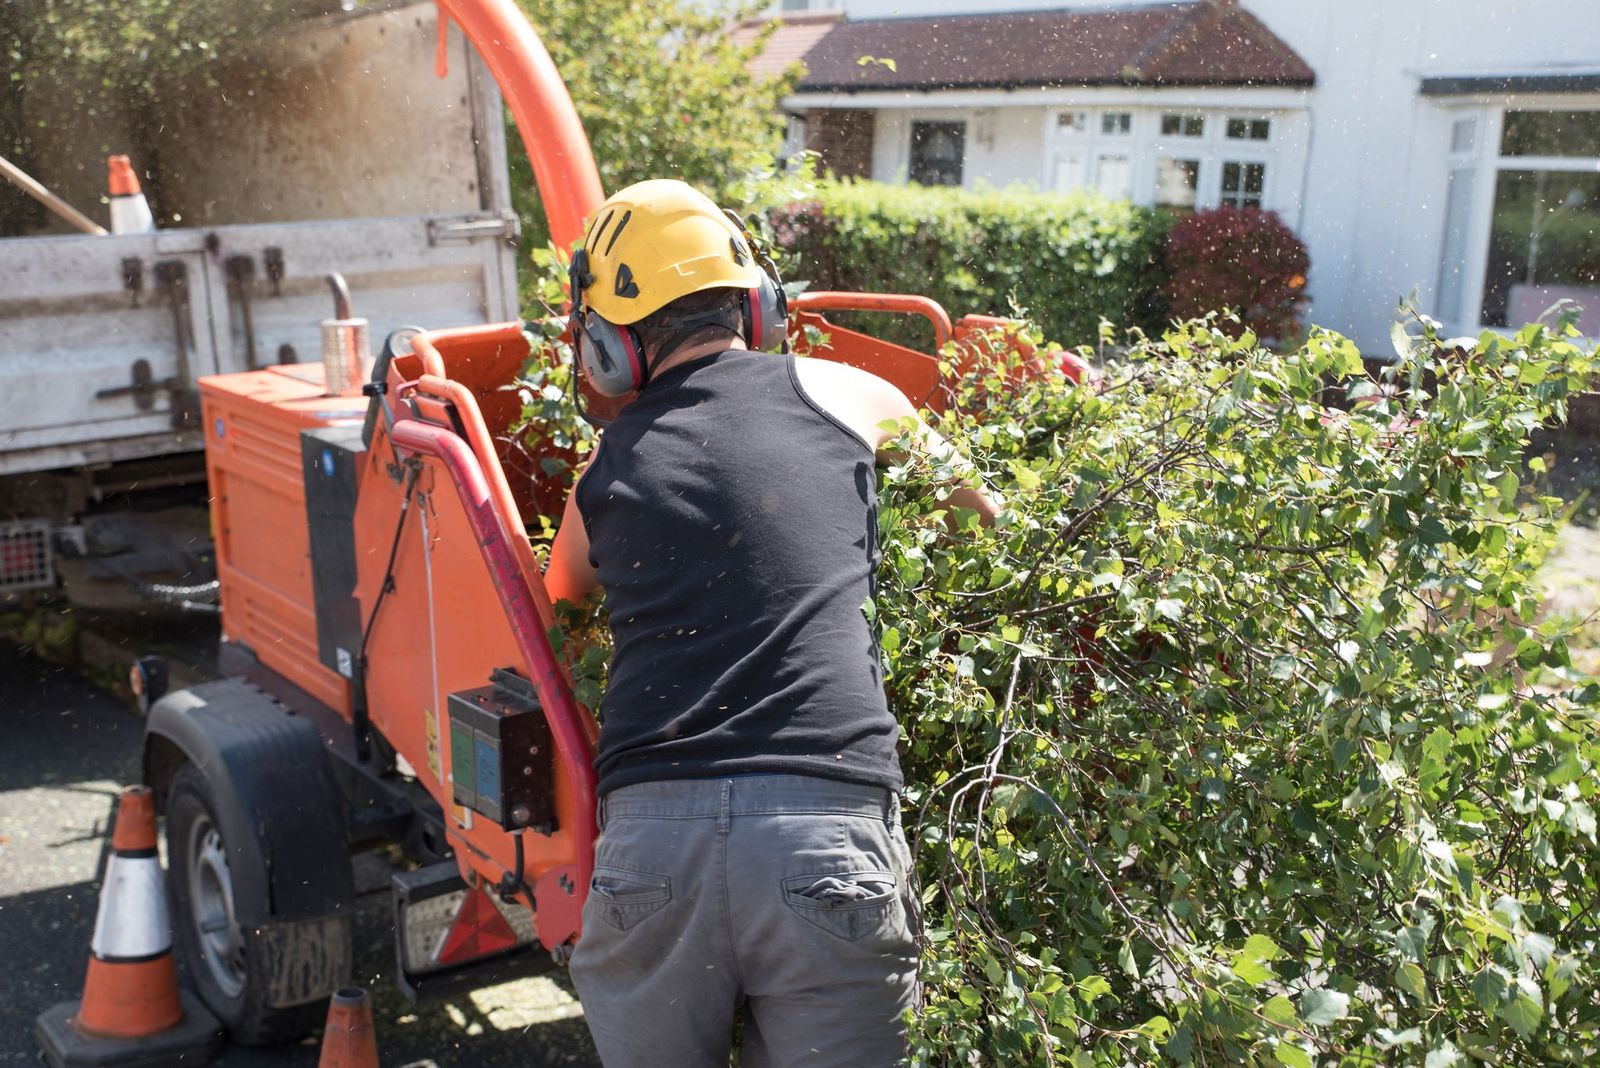 Hire Someone to Help With Your Tree Pruning in Champlin MN